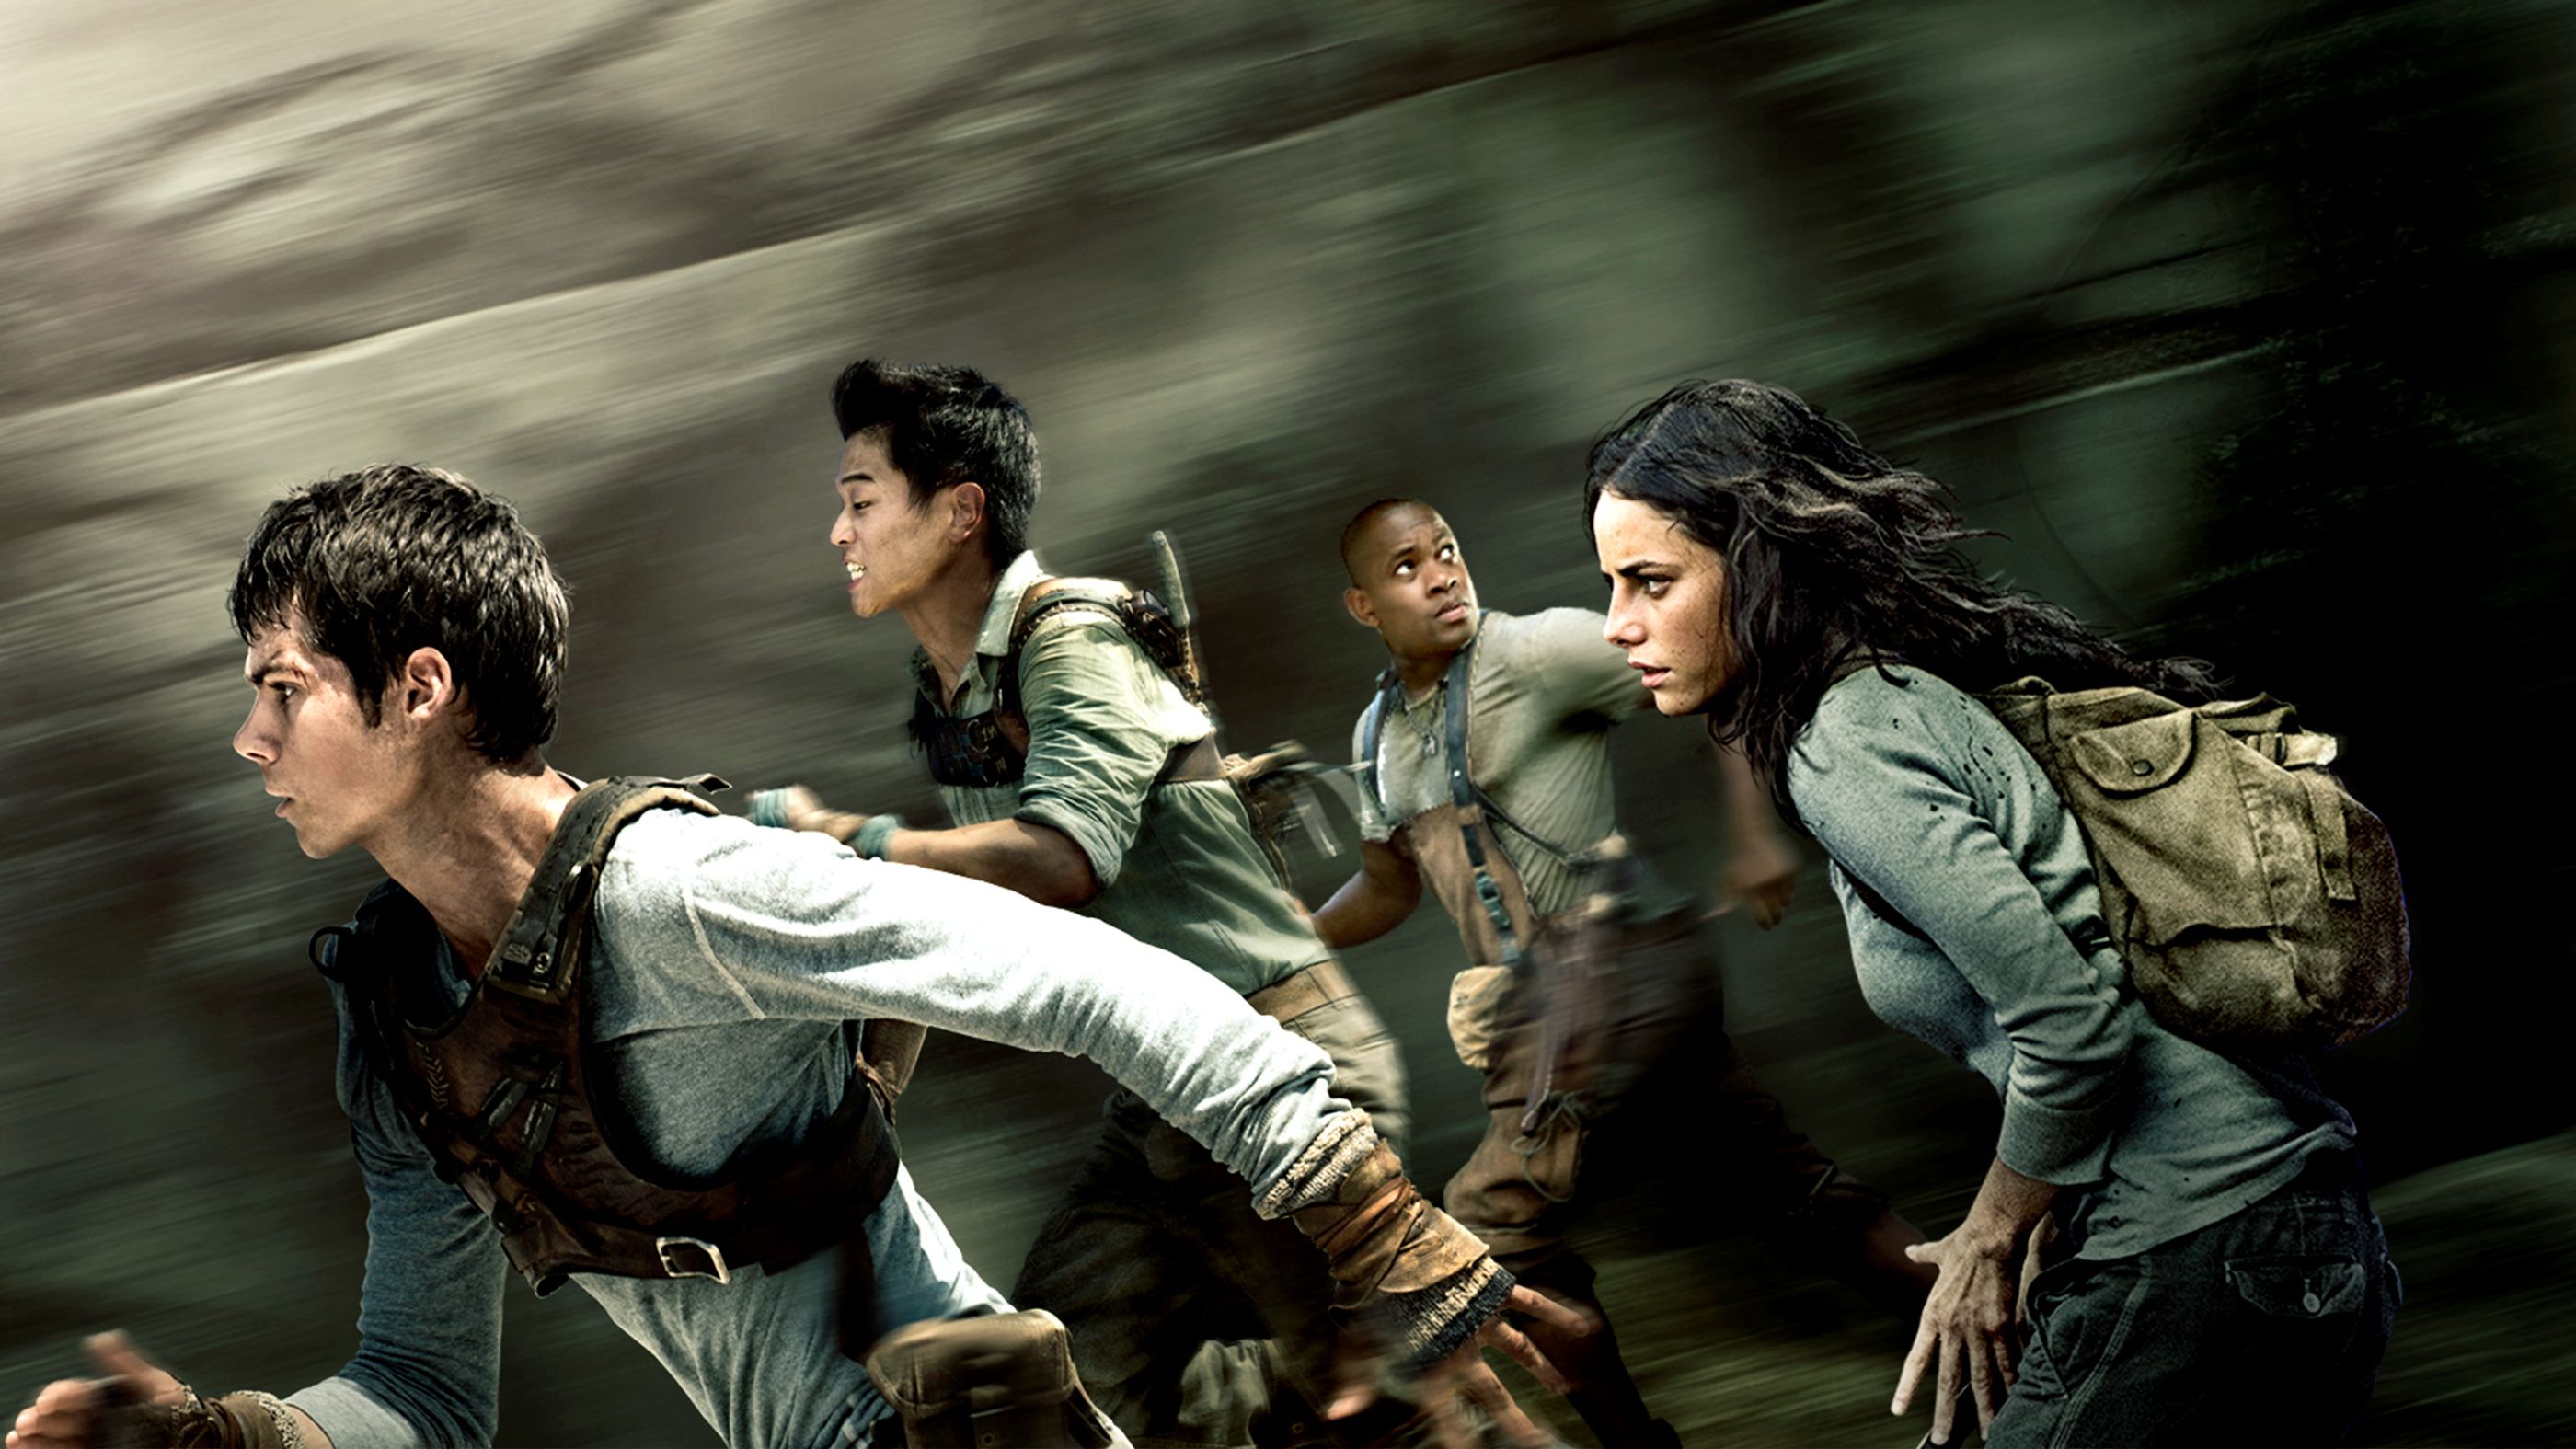 MOVIE Coming Soon: 'THE MAZE RUNNER' [2014] Watch Trailer Now